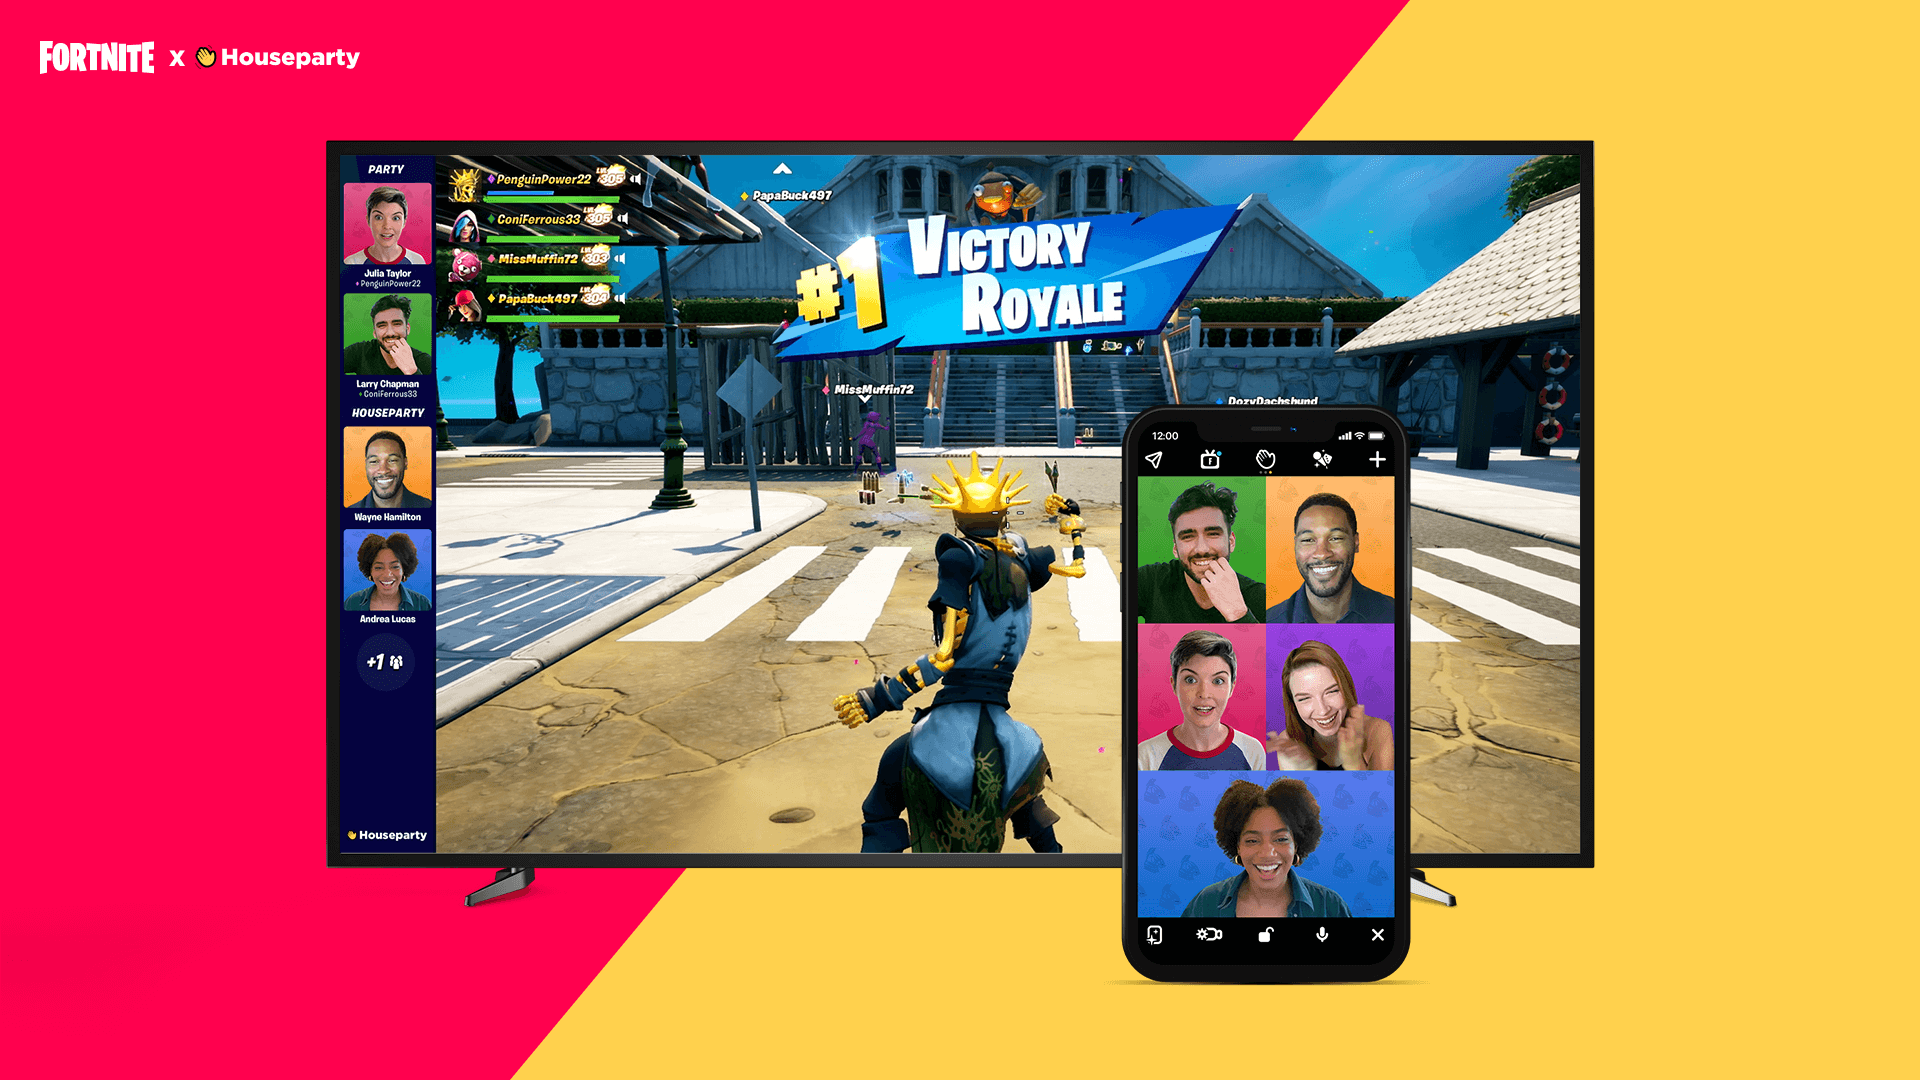 Fortnite Adds In Game Video Chat Functionality Via Houseparty App For Pc And Ps4 5 Dot Esports